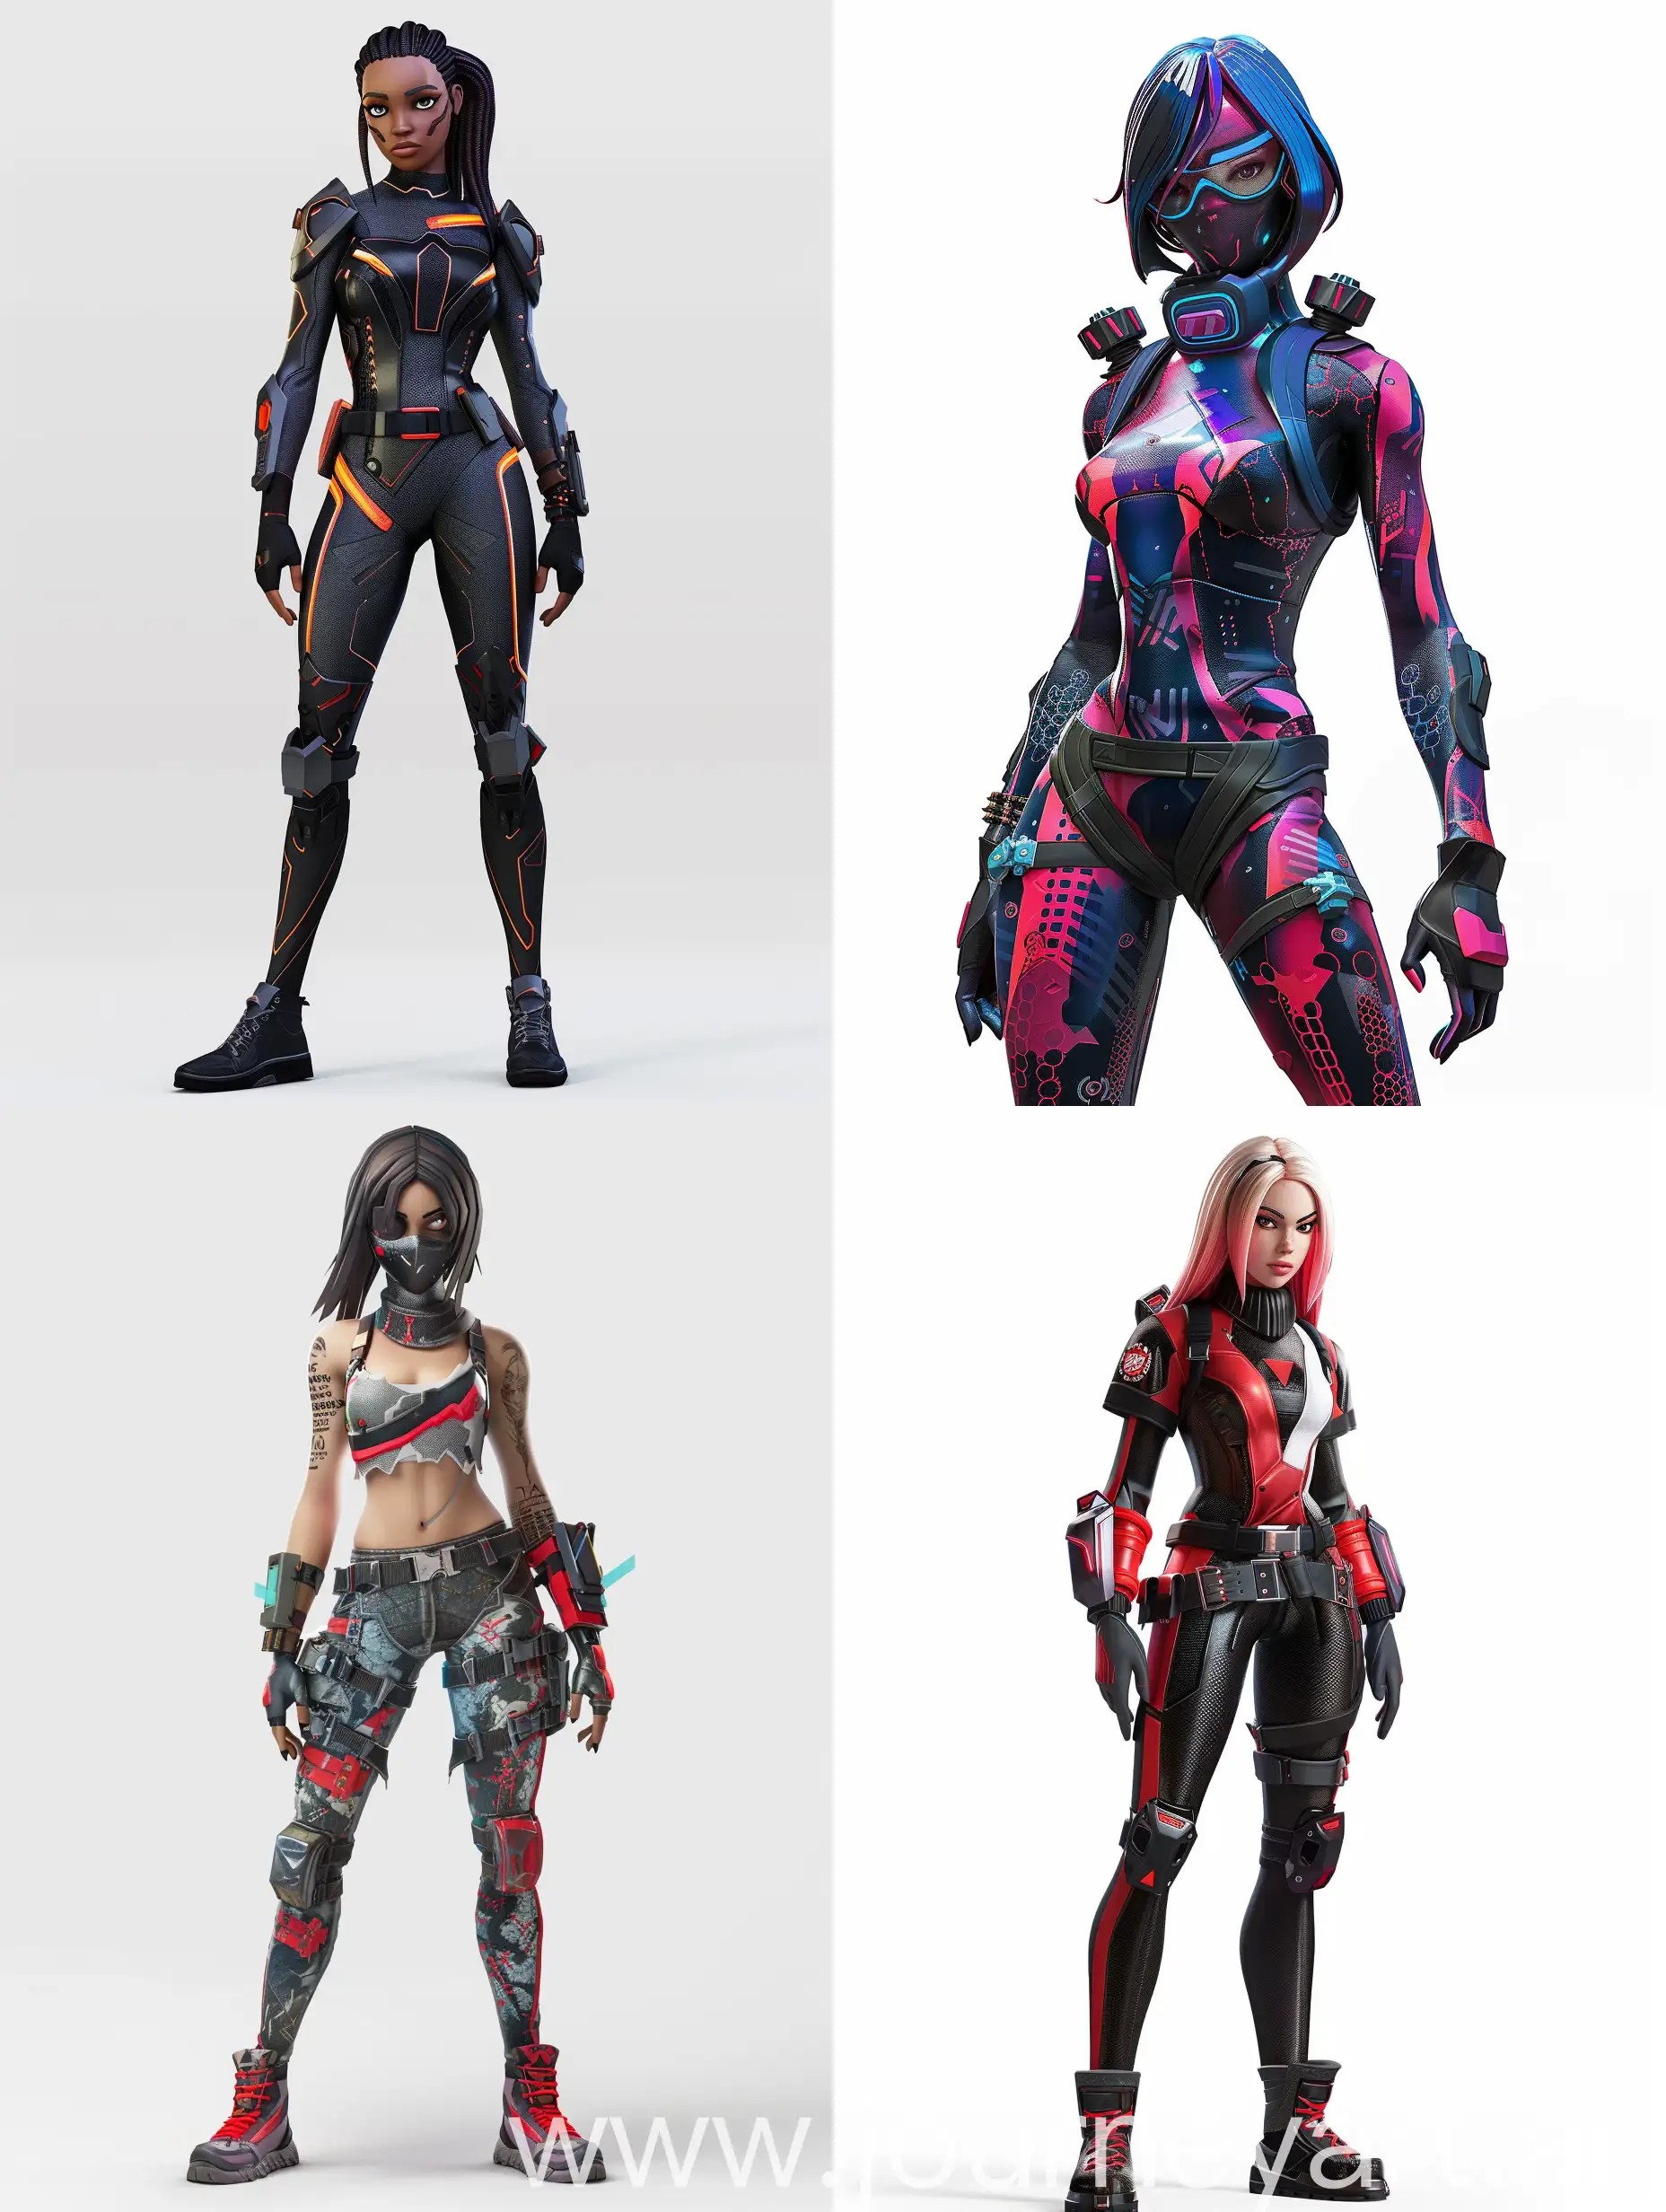 is Rebecca cyberpunk as a fortnite character, 3d realistic render, full body image, white background, character design